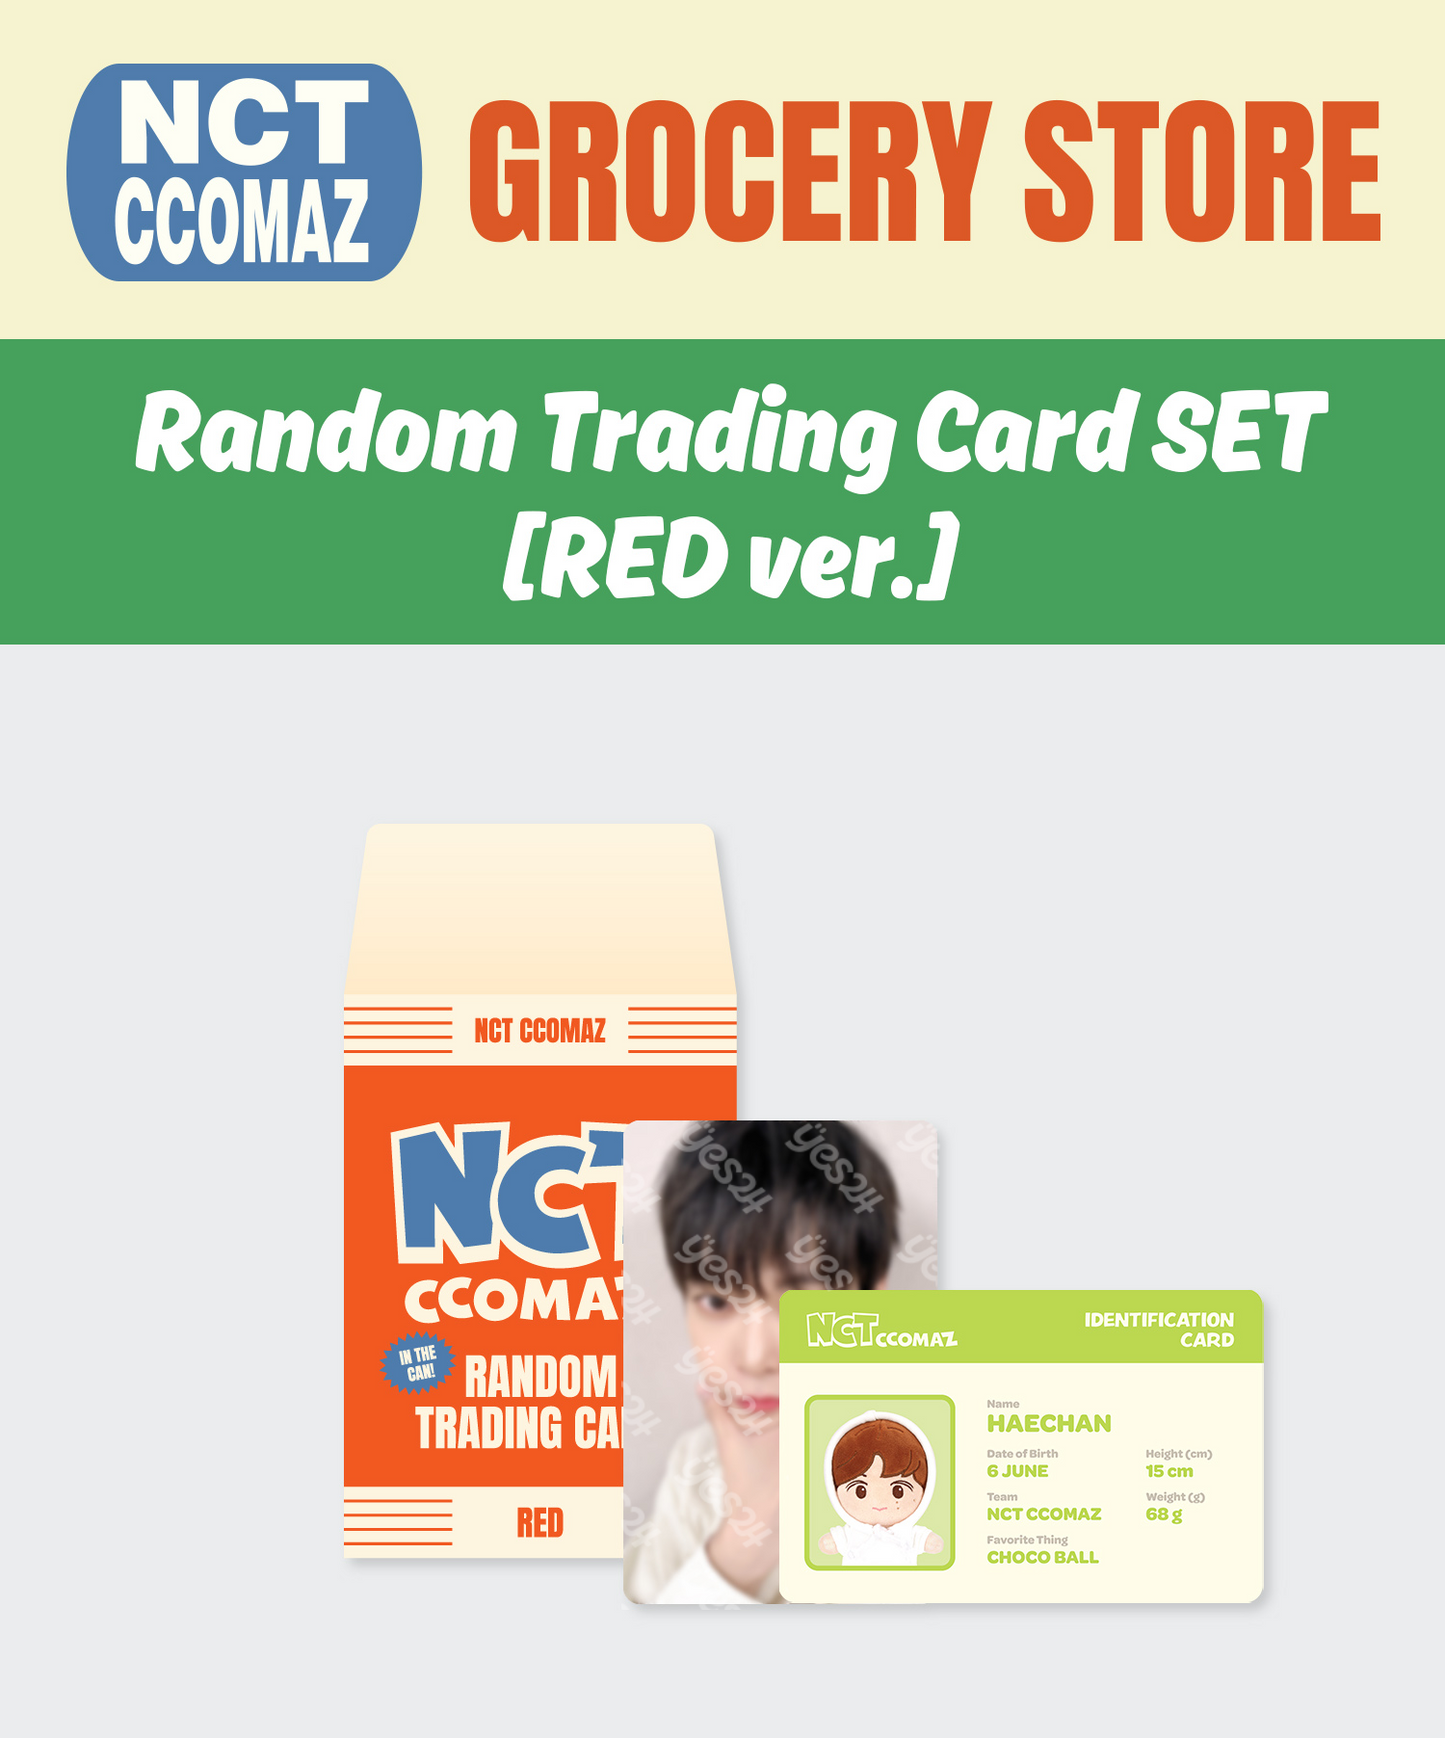 (ONE) NCT CCOMAZ GROCERY STORE RANDOM TRADING CARD SET (RED Ver)